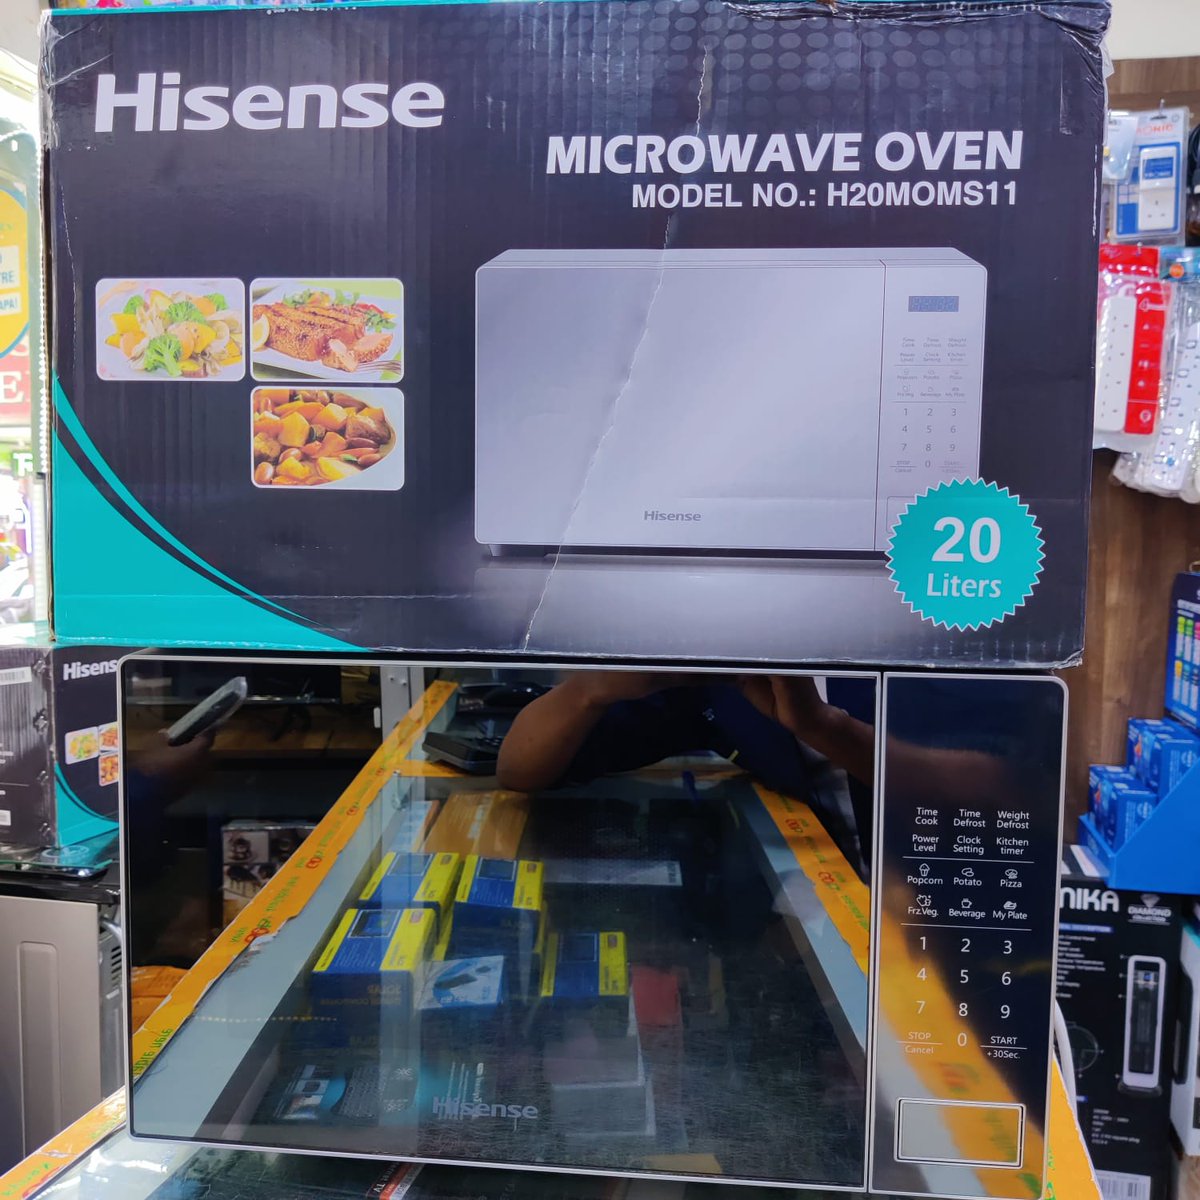 The festive season is here wazee,msisahau i deal electronics,grab a microwave for yous and your fams at pocketfriendly prices,make an order today delivery nafanya hadi kwako kwa nyumba.